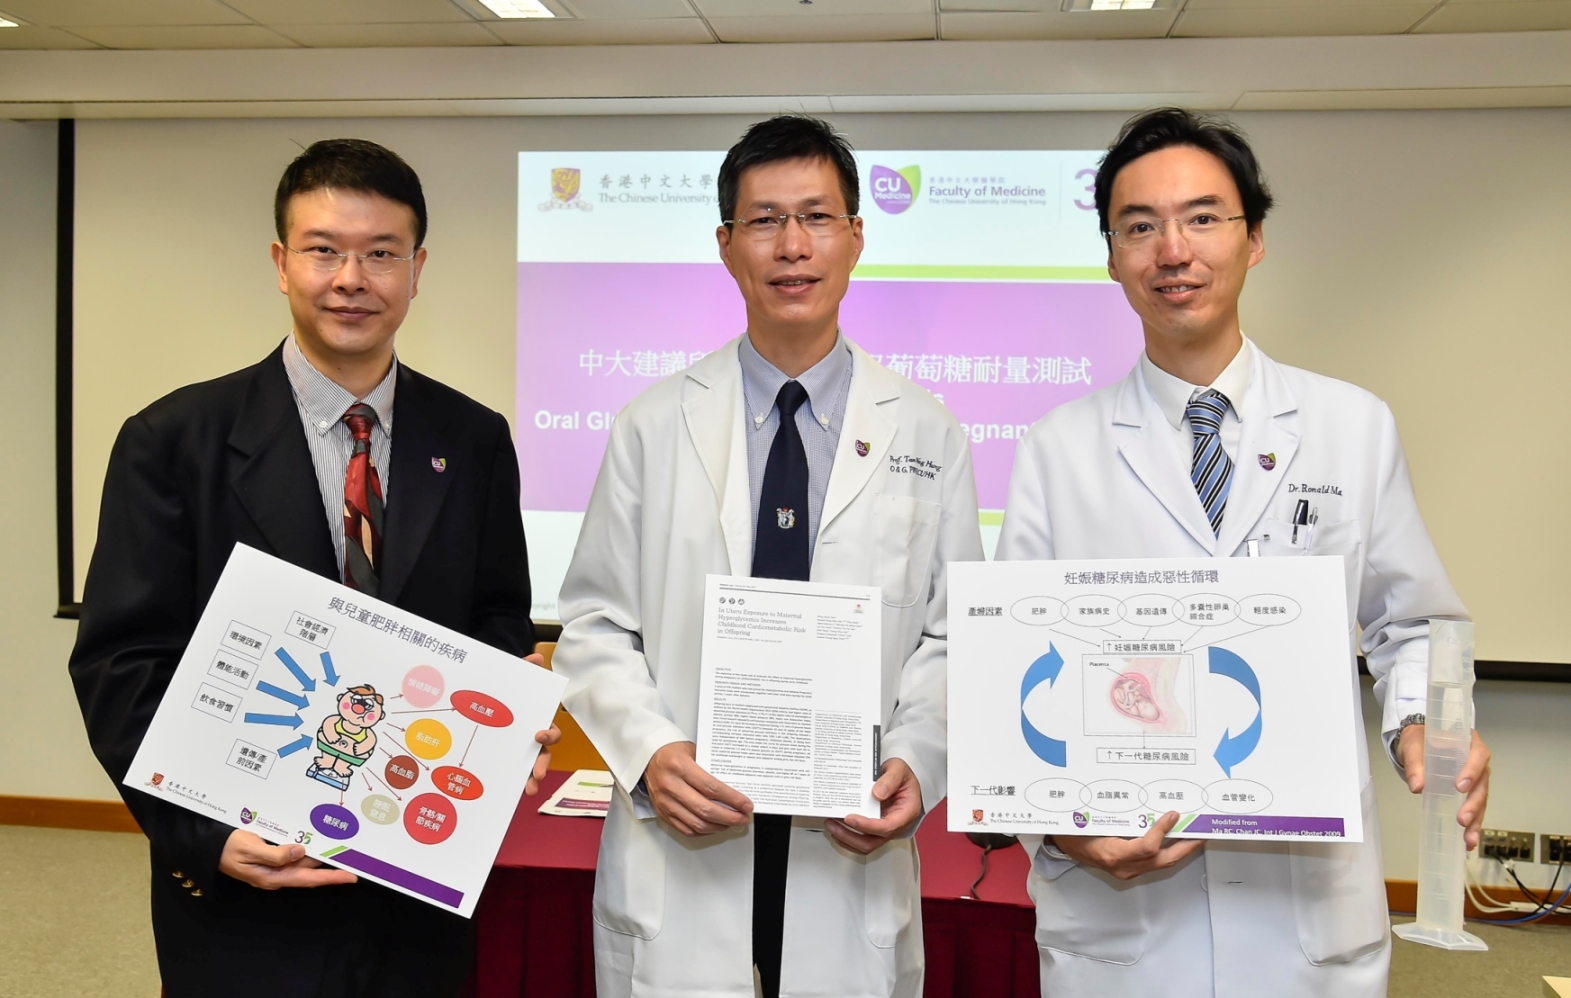 A recent study by CUHK Faculty of Medicine reveals that children born to mothers who suffered from gestational diabetes mellitus have higher risks of developing prediabetes or diabetes. (From left) Prof. Albert LI, Department of Paediatrics; Prof. Wing Hung TAM, Department of Obstetrics and Gynaecology; and Prof. Ronald Ching Wan MA, Department of Medicine and Therapeutics.